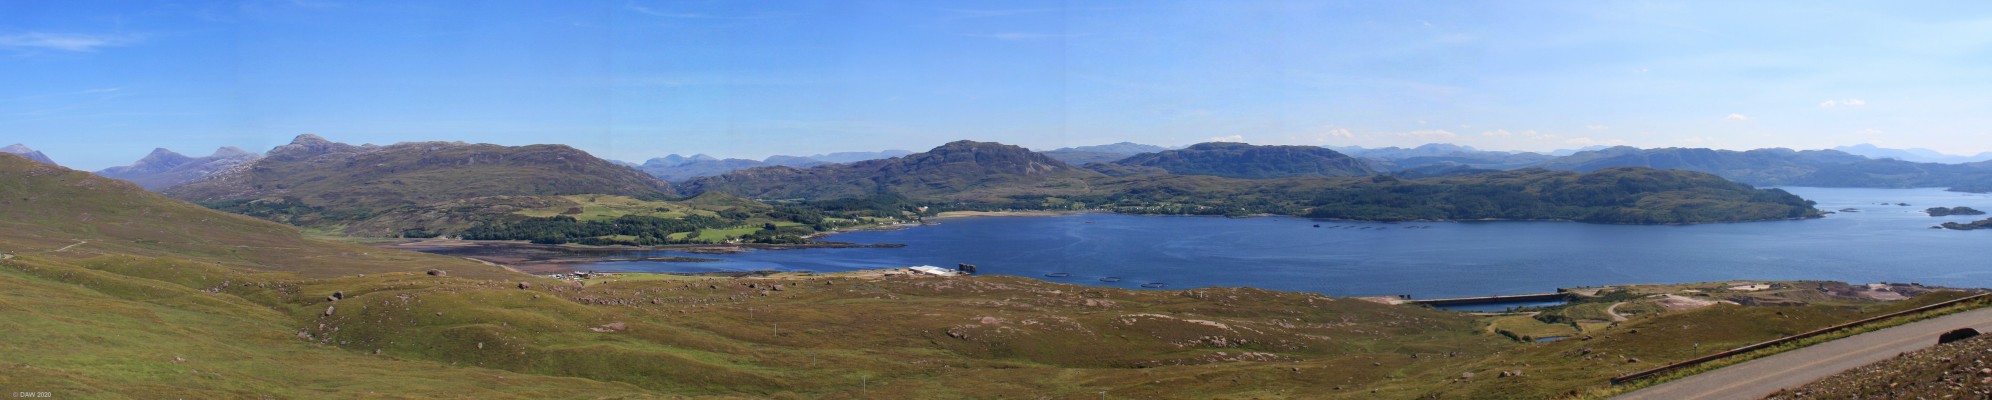 Loch Kishorn
Panoramic view from the Bealach na Ba road looking south over Loch Kishorn.  The former Kishorn Oil fabrication yard can be seen on the right.  At its peek in the 1980s it employed thousands of workers.  Due to its remote location most material came to the yard by boat. [url=https://www.streetmap.co.uk/map.srf?X=179362&Y=841180&A=Y&Z=120&ax=181187&ay=840940/] Map location. [/url]
